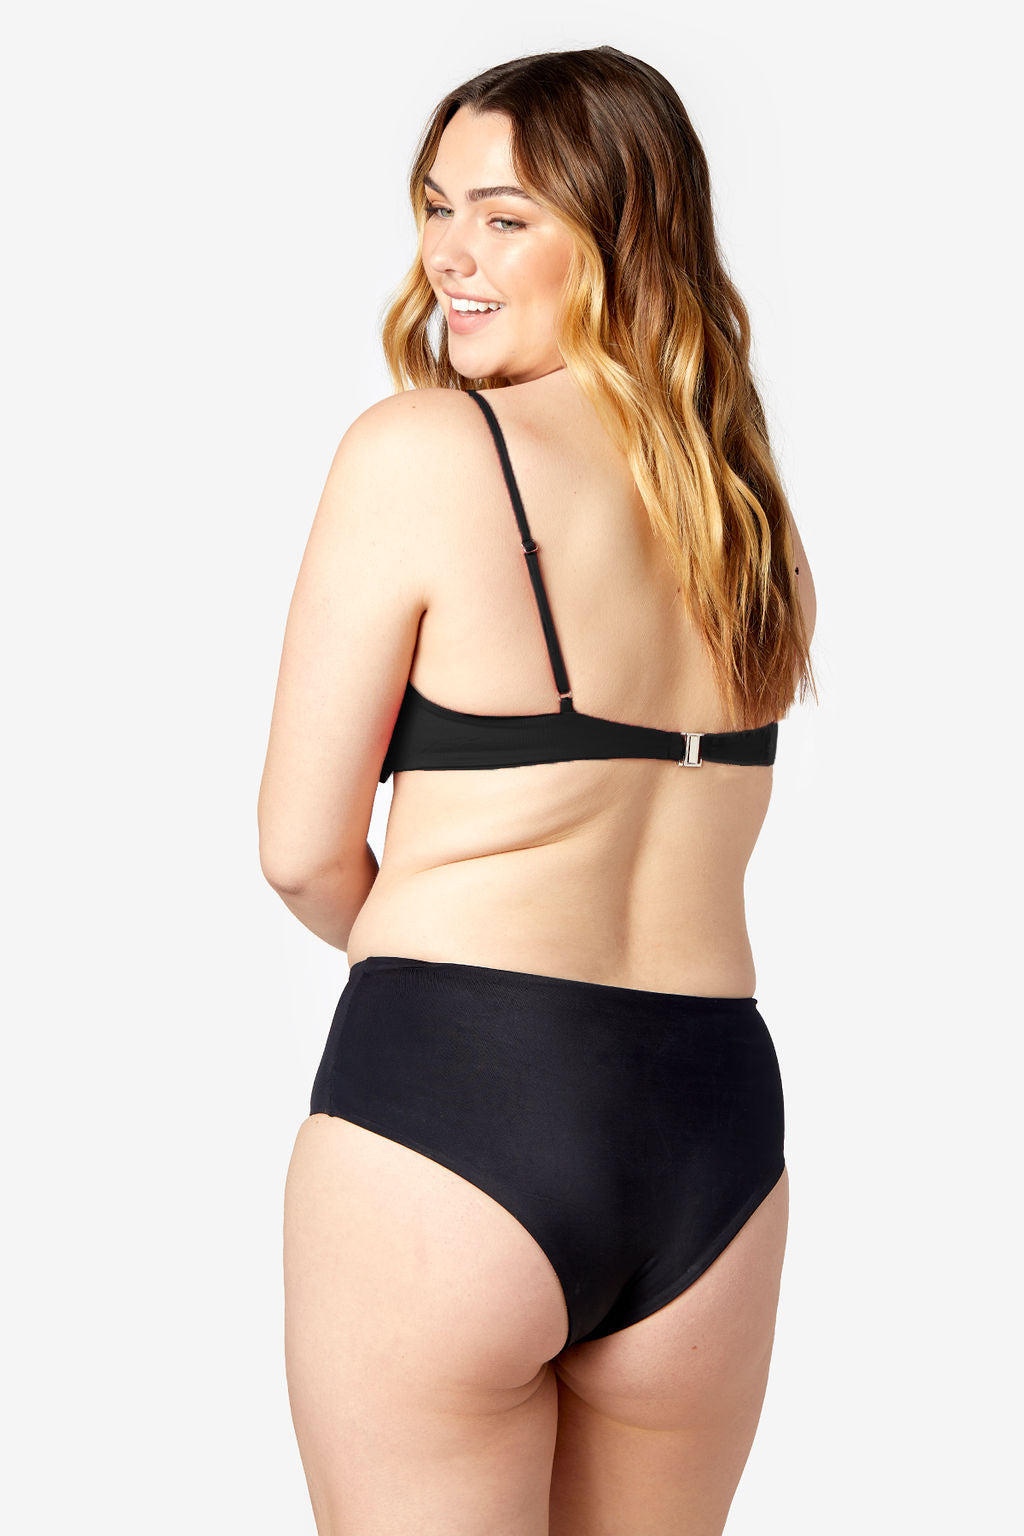 The Rebel Swim Top - Underwire Swimsuit Top - Beauty & The Beach